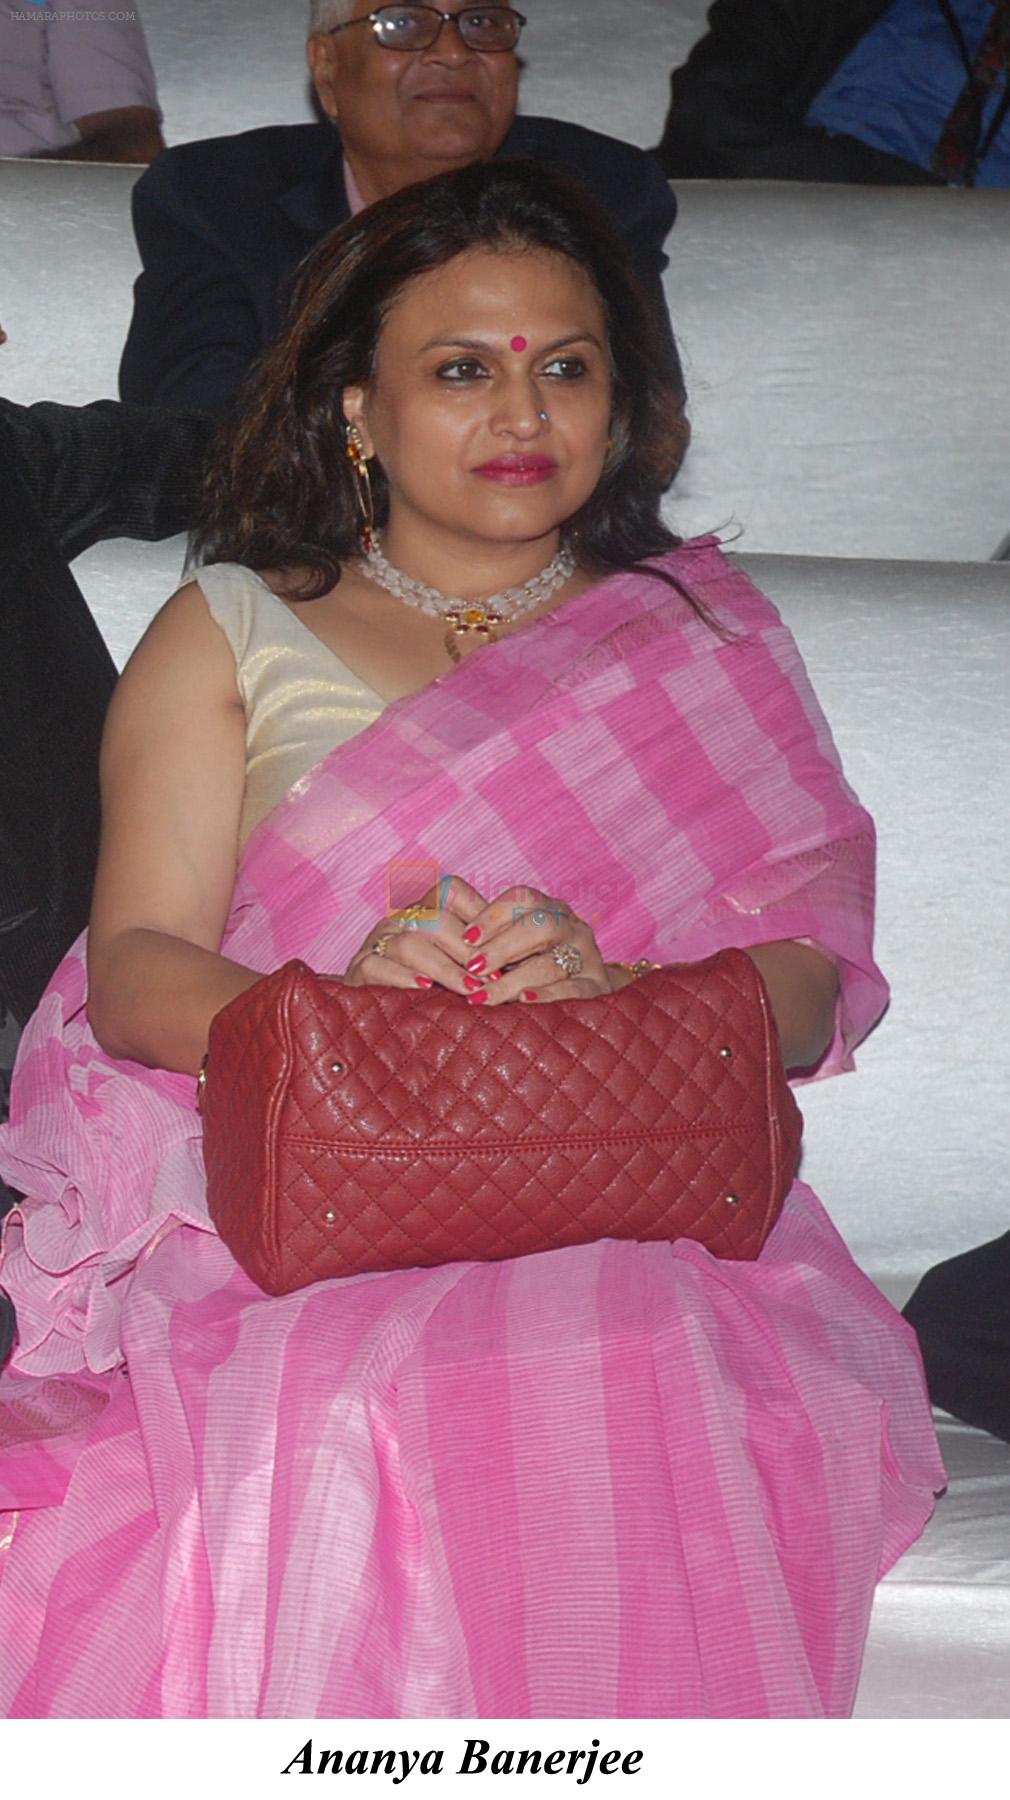 Ananya Banerjee at the 63rd Annual Conference of Cardiological Society of India in NCPA complex, Mumbai on 9th Dec 2011